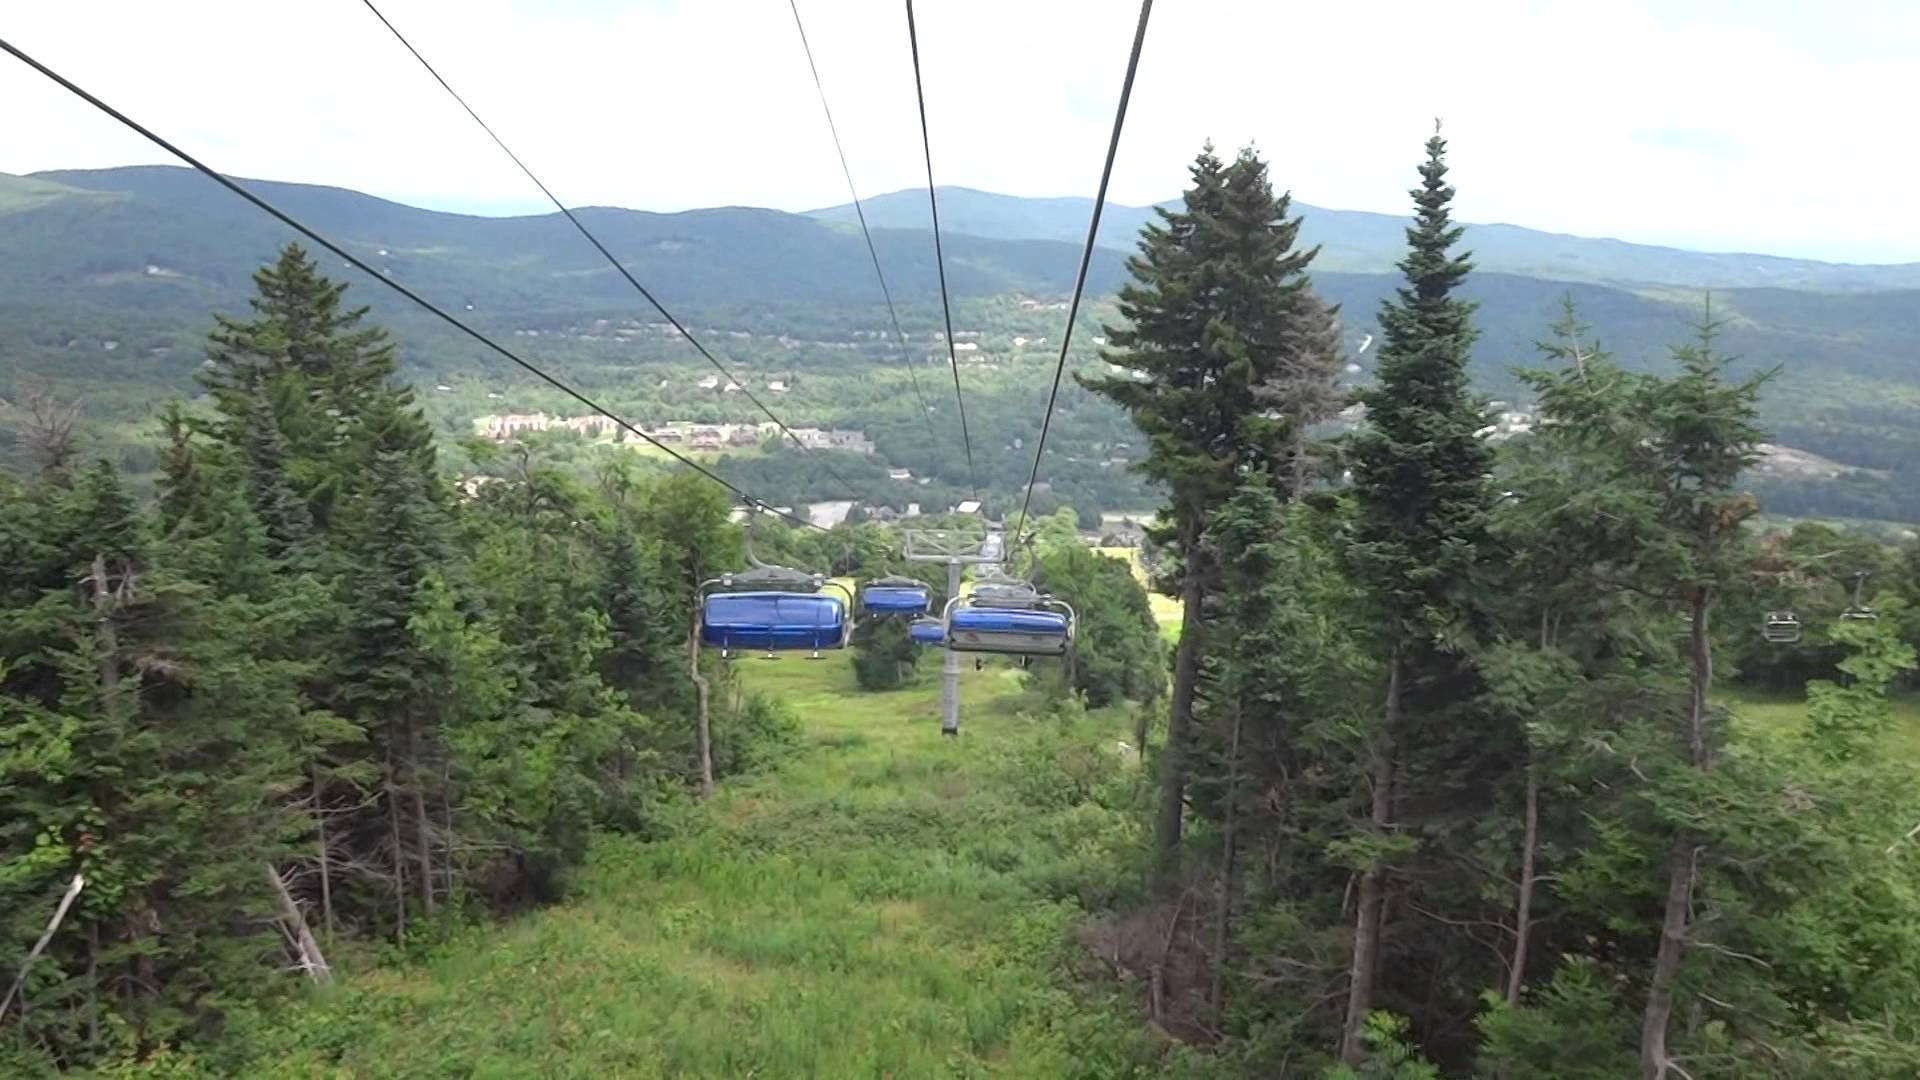 Scenic Chairlift Ride down Mount Snow - YouTube